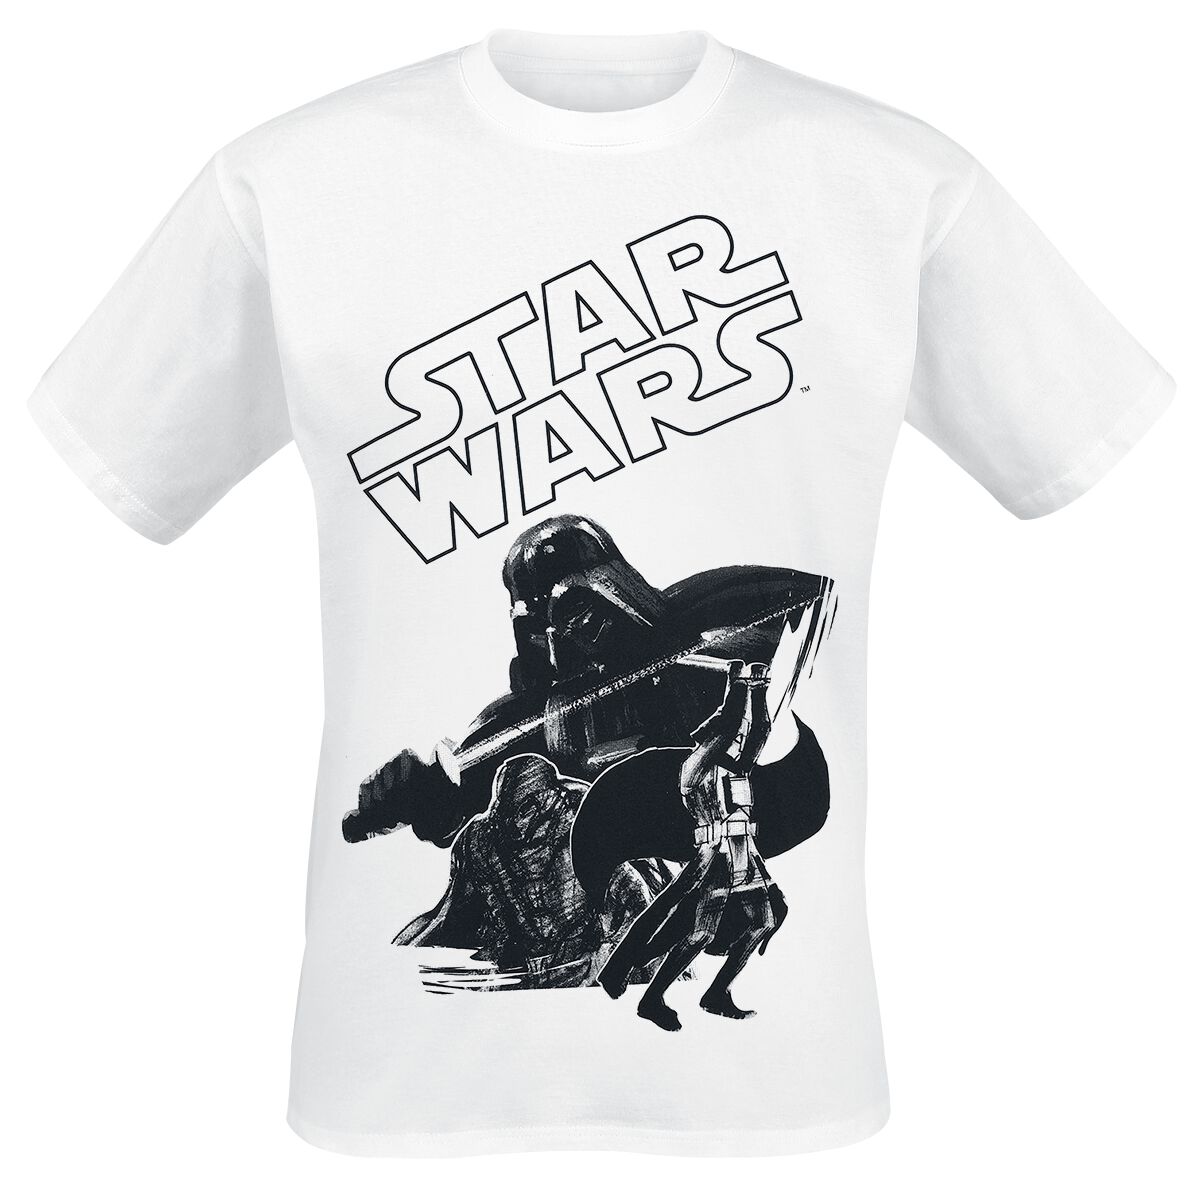 T-Shirt Manches courtes de Star Wars - Darth Vader - Lord Vader - S à M - pour Homme - blanc